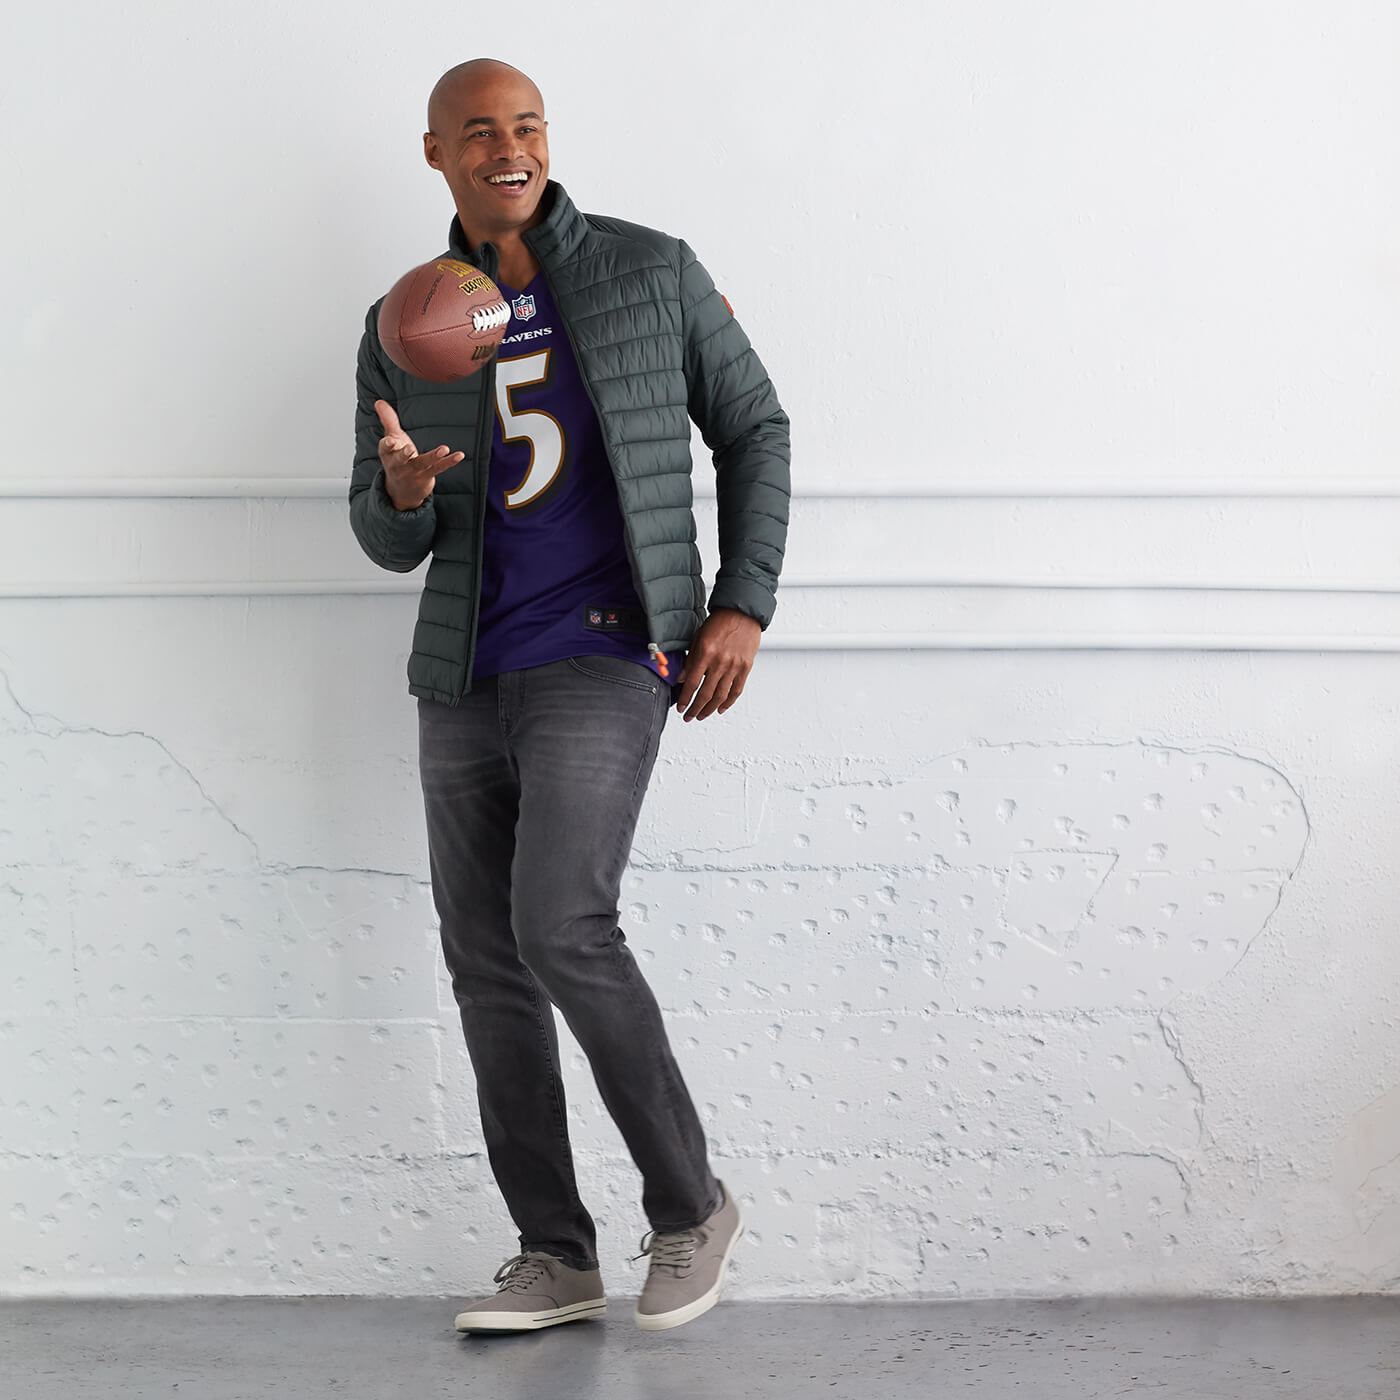 Here's how to create outfits with a football jersey - Styl Inc